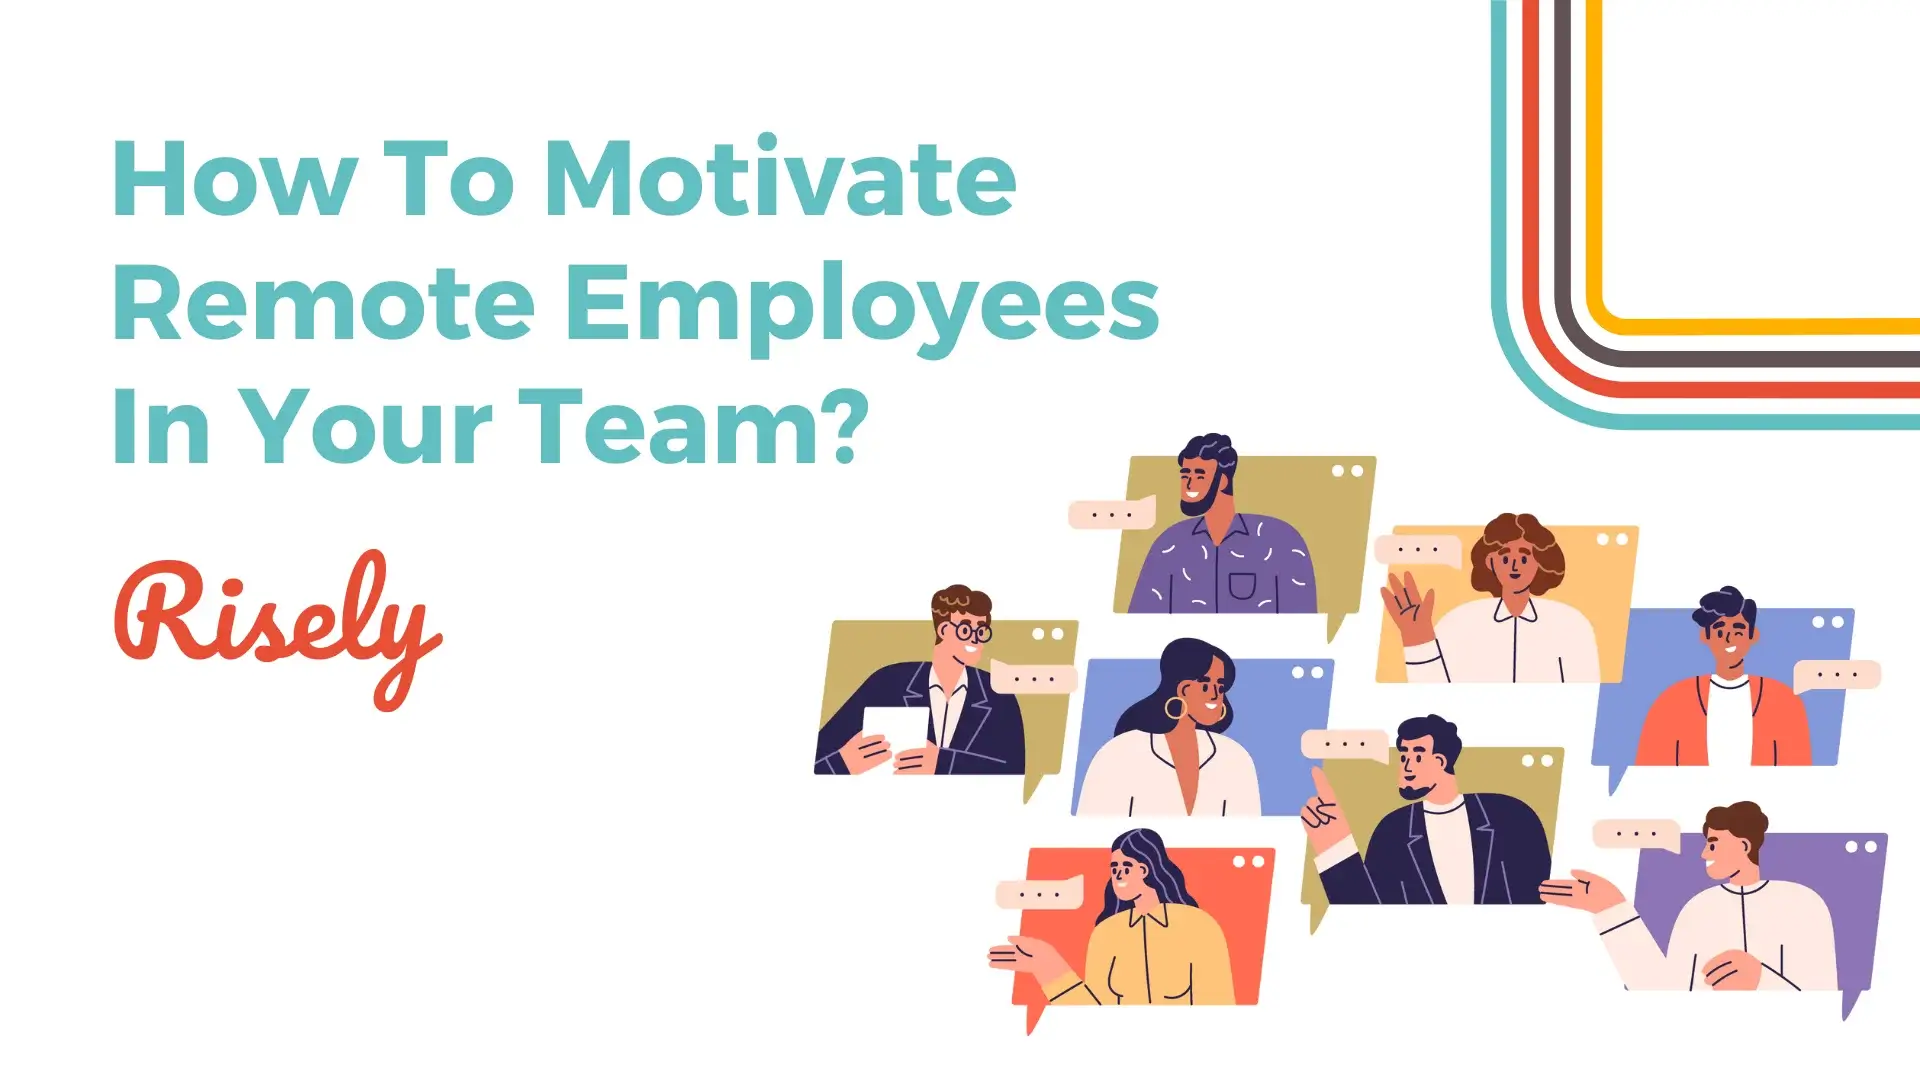 How To Motivate Remote Employees In Your Team?